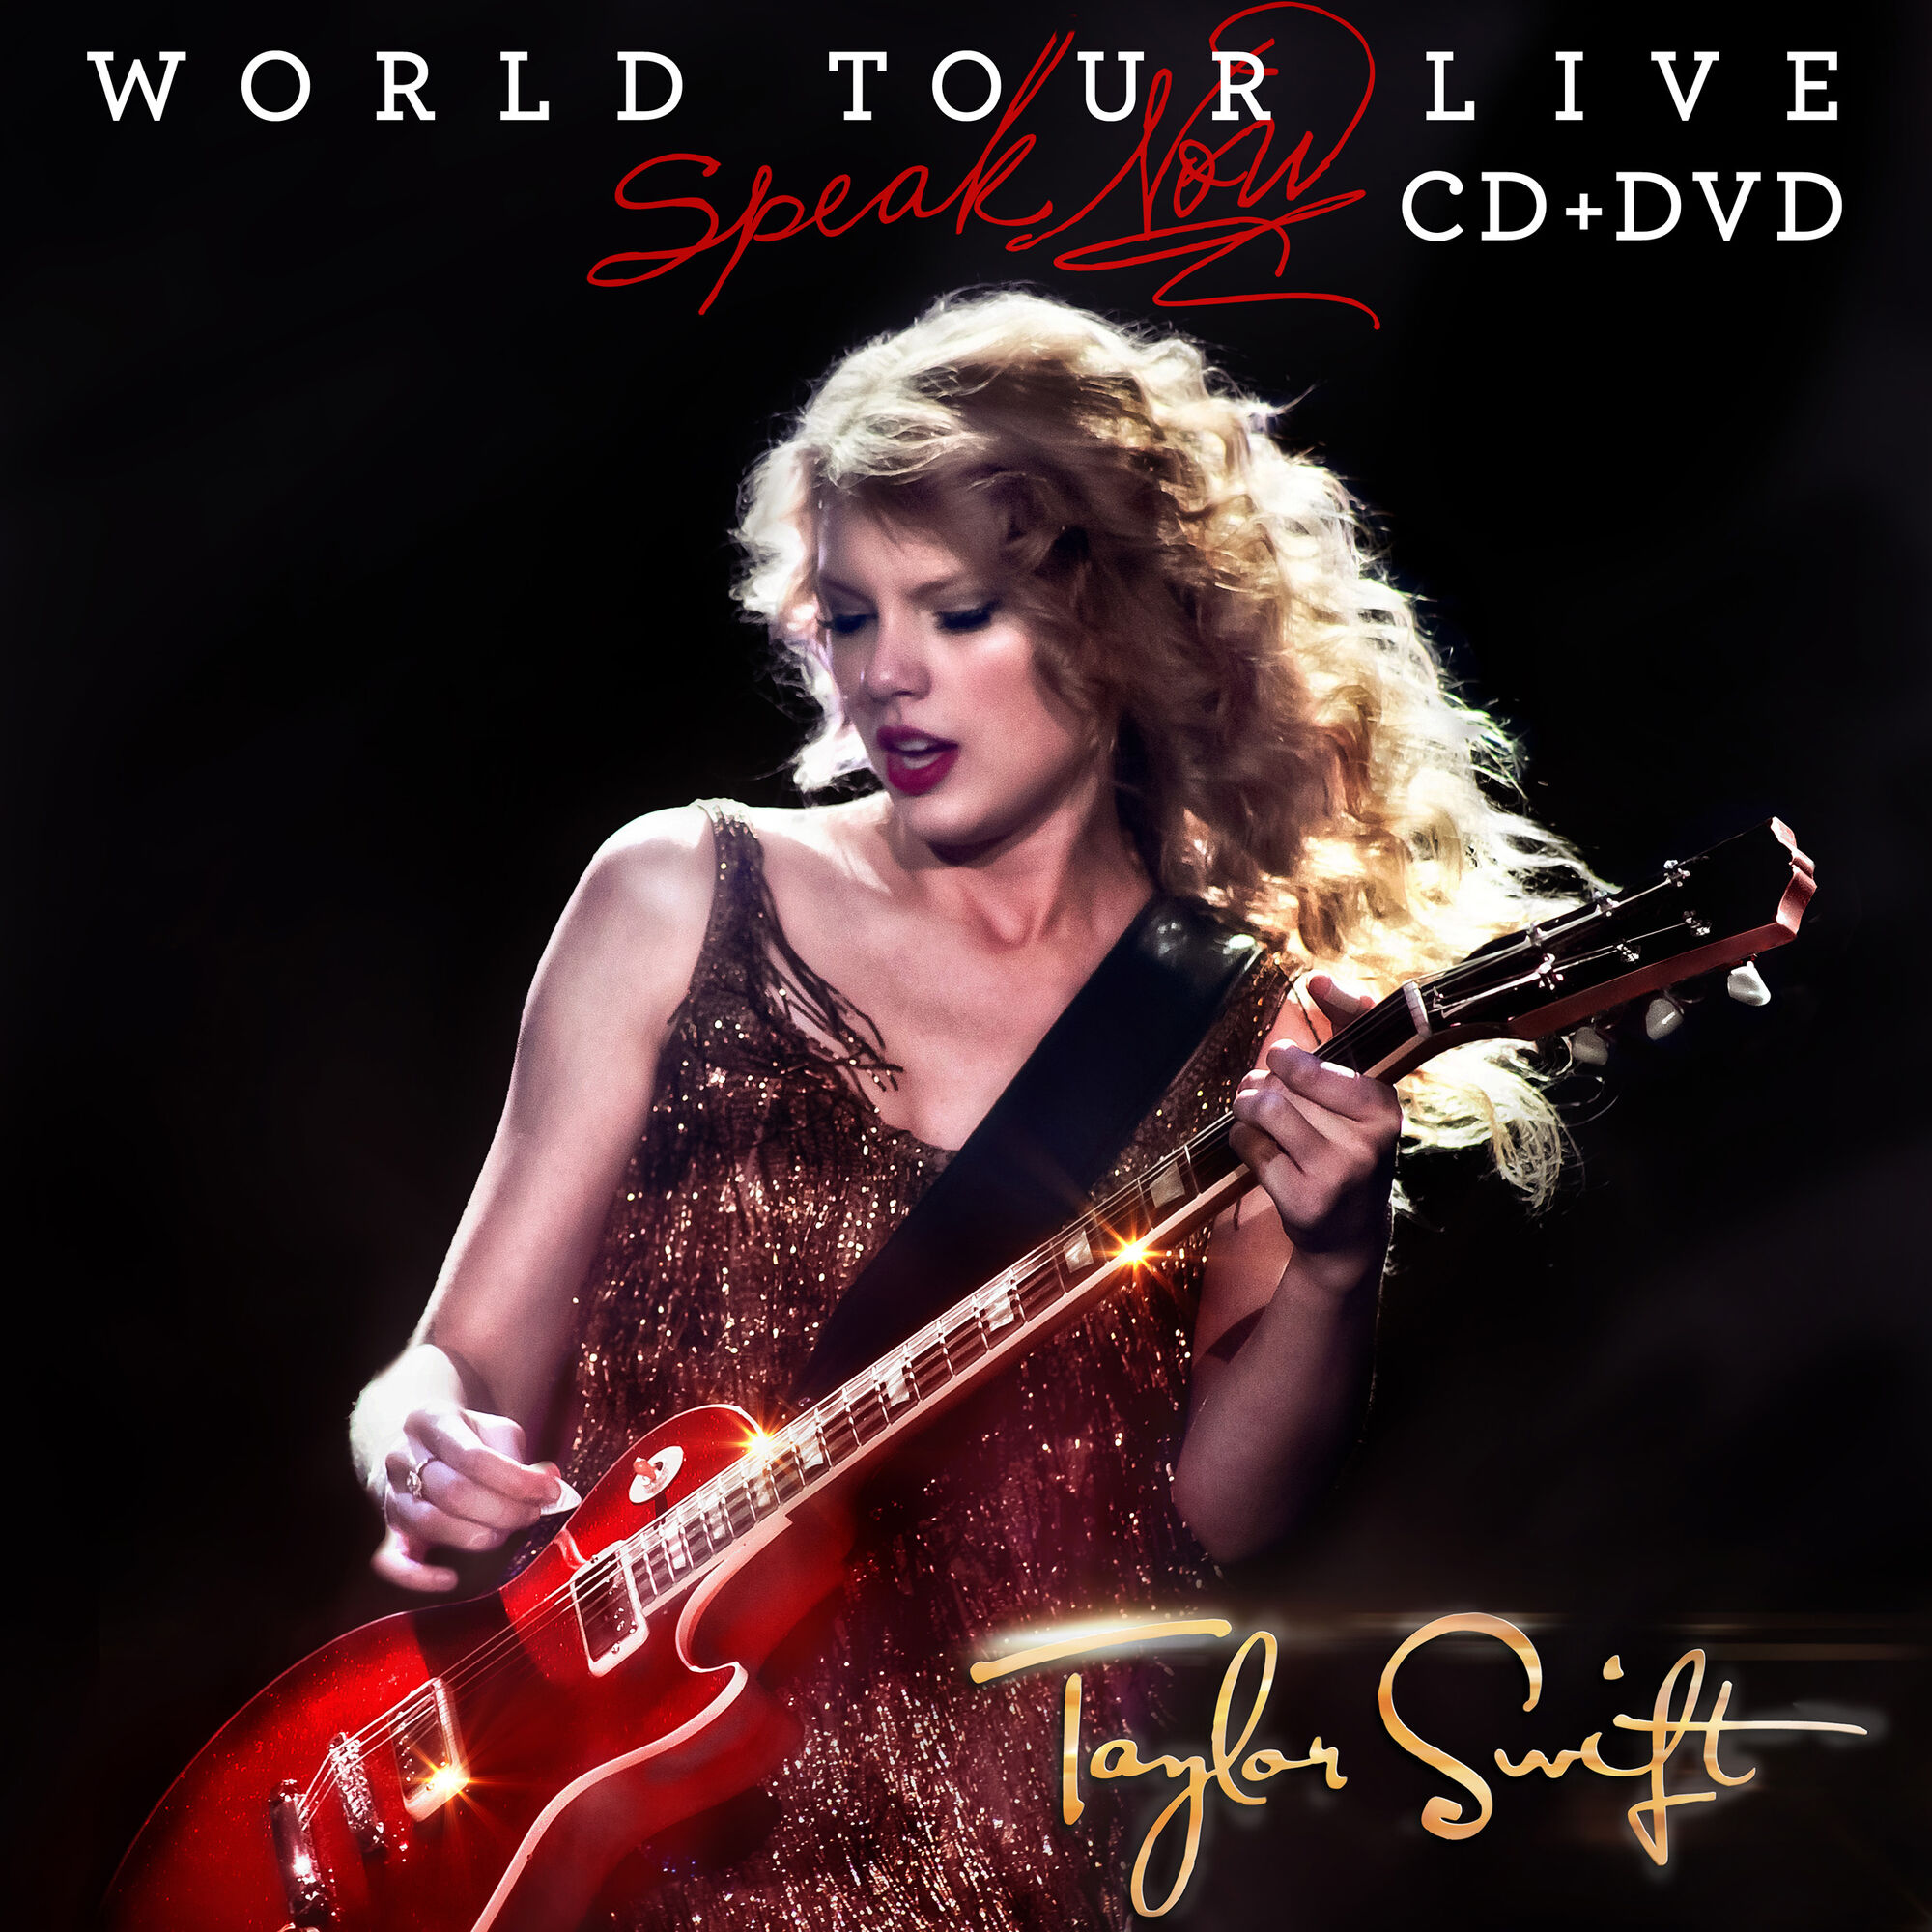 our song live speak now tour